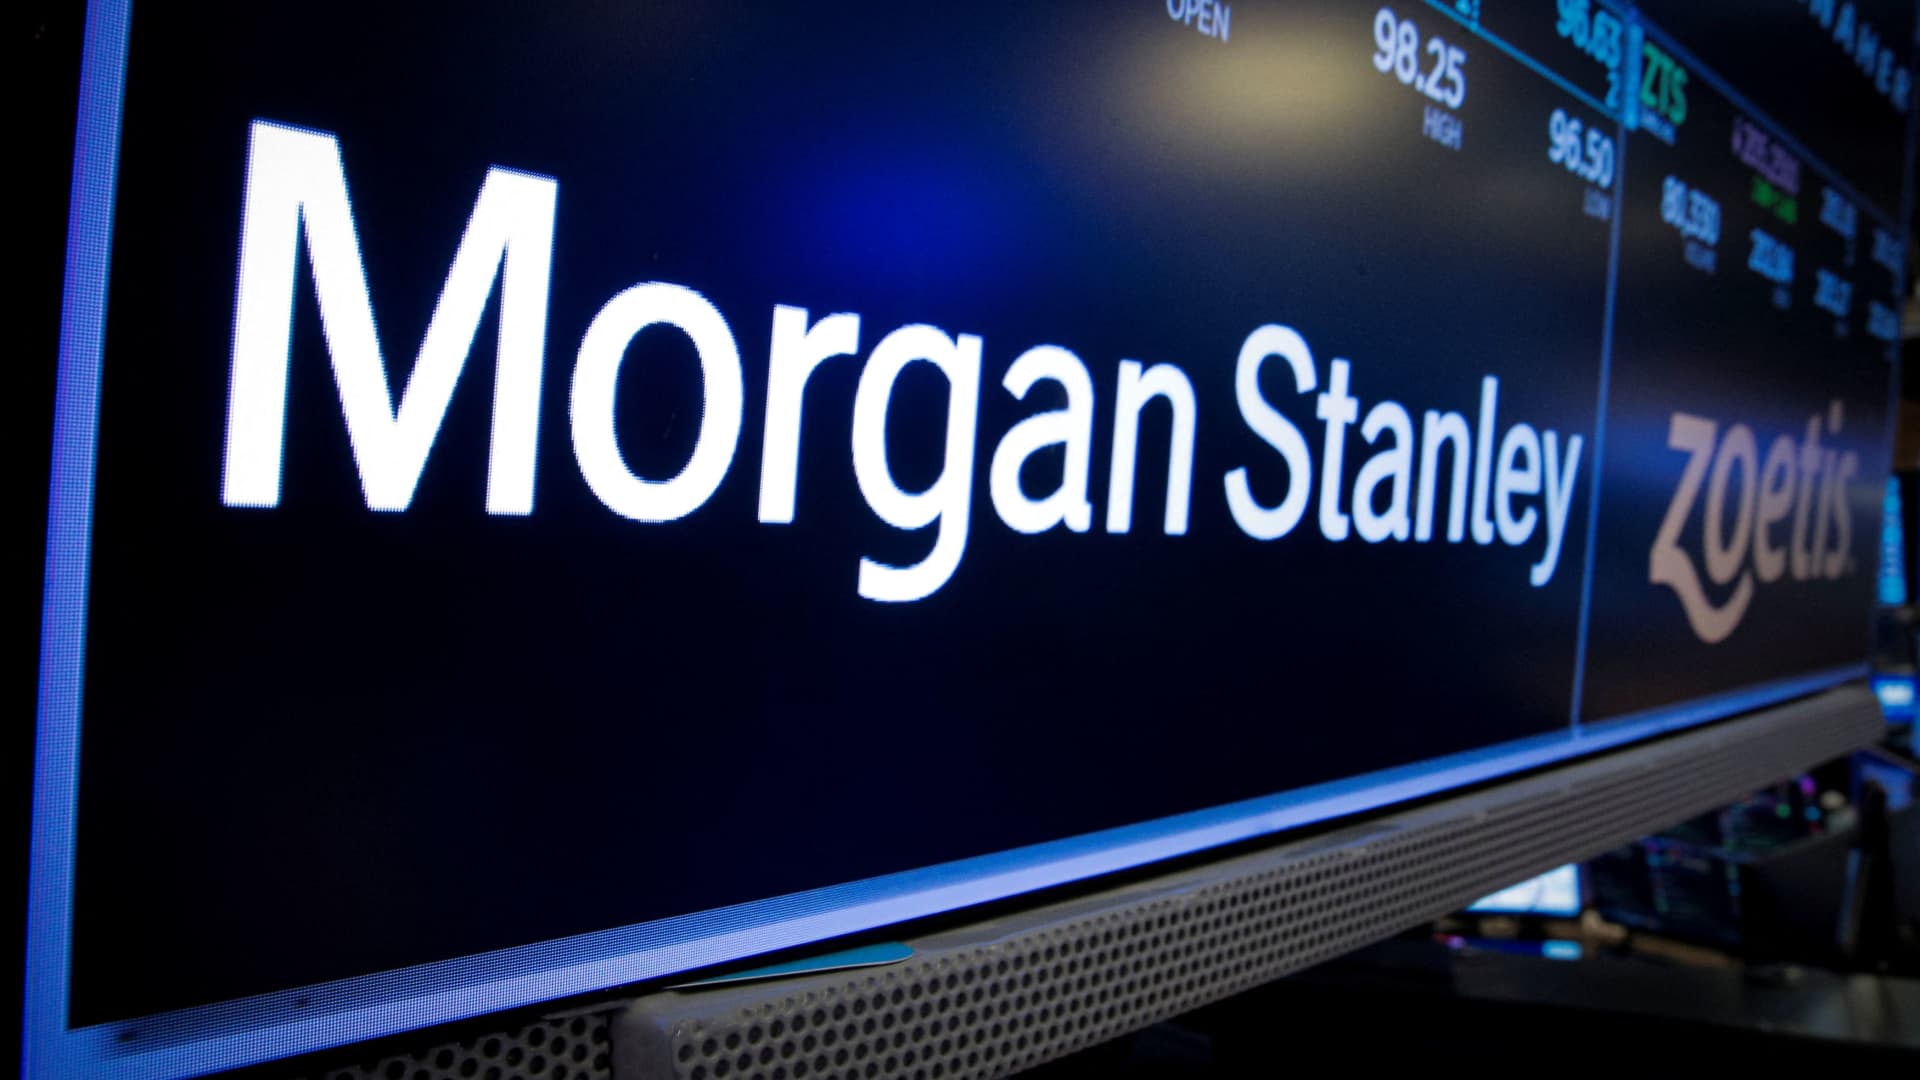 Indian stocks to buy to ride the investment boom: Morgan Stanley